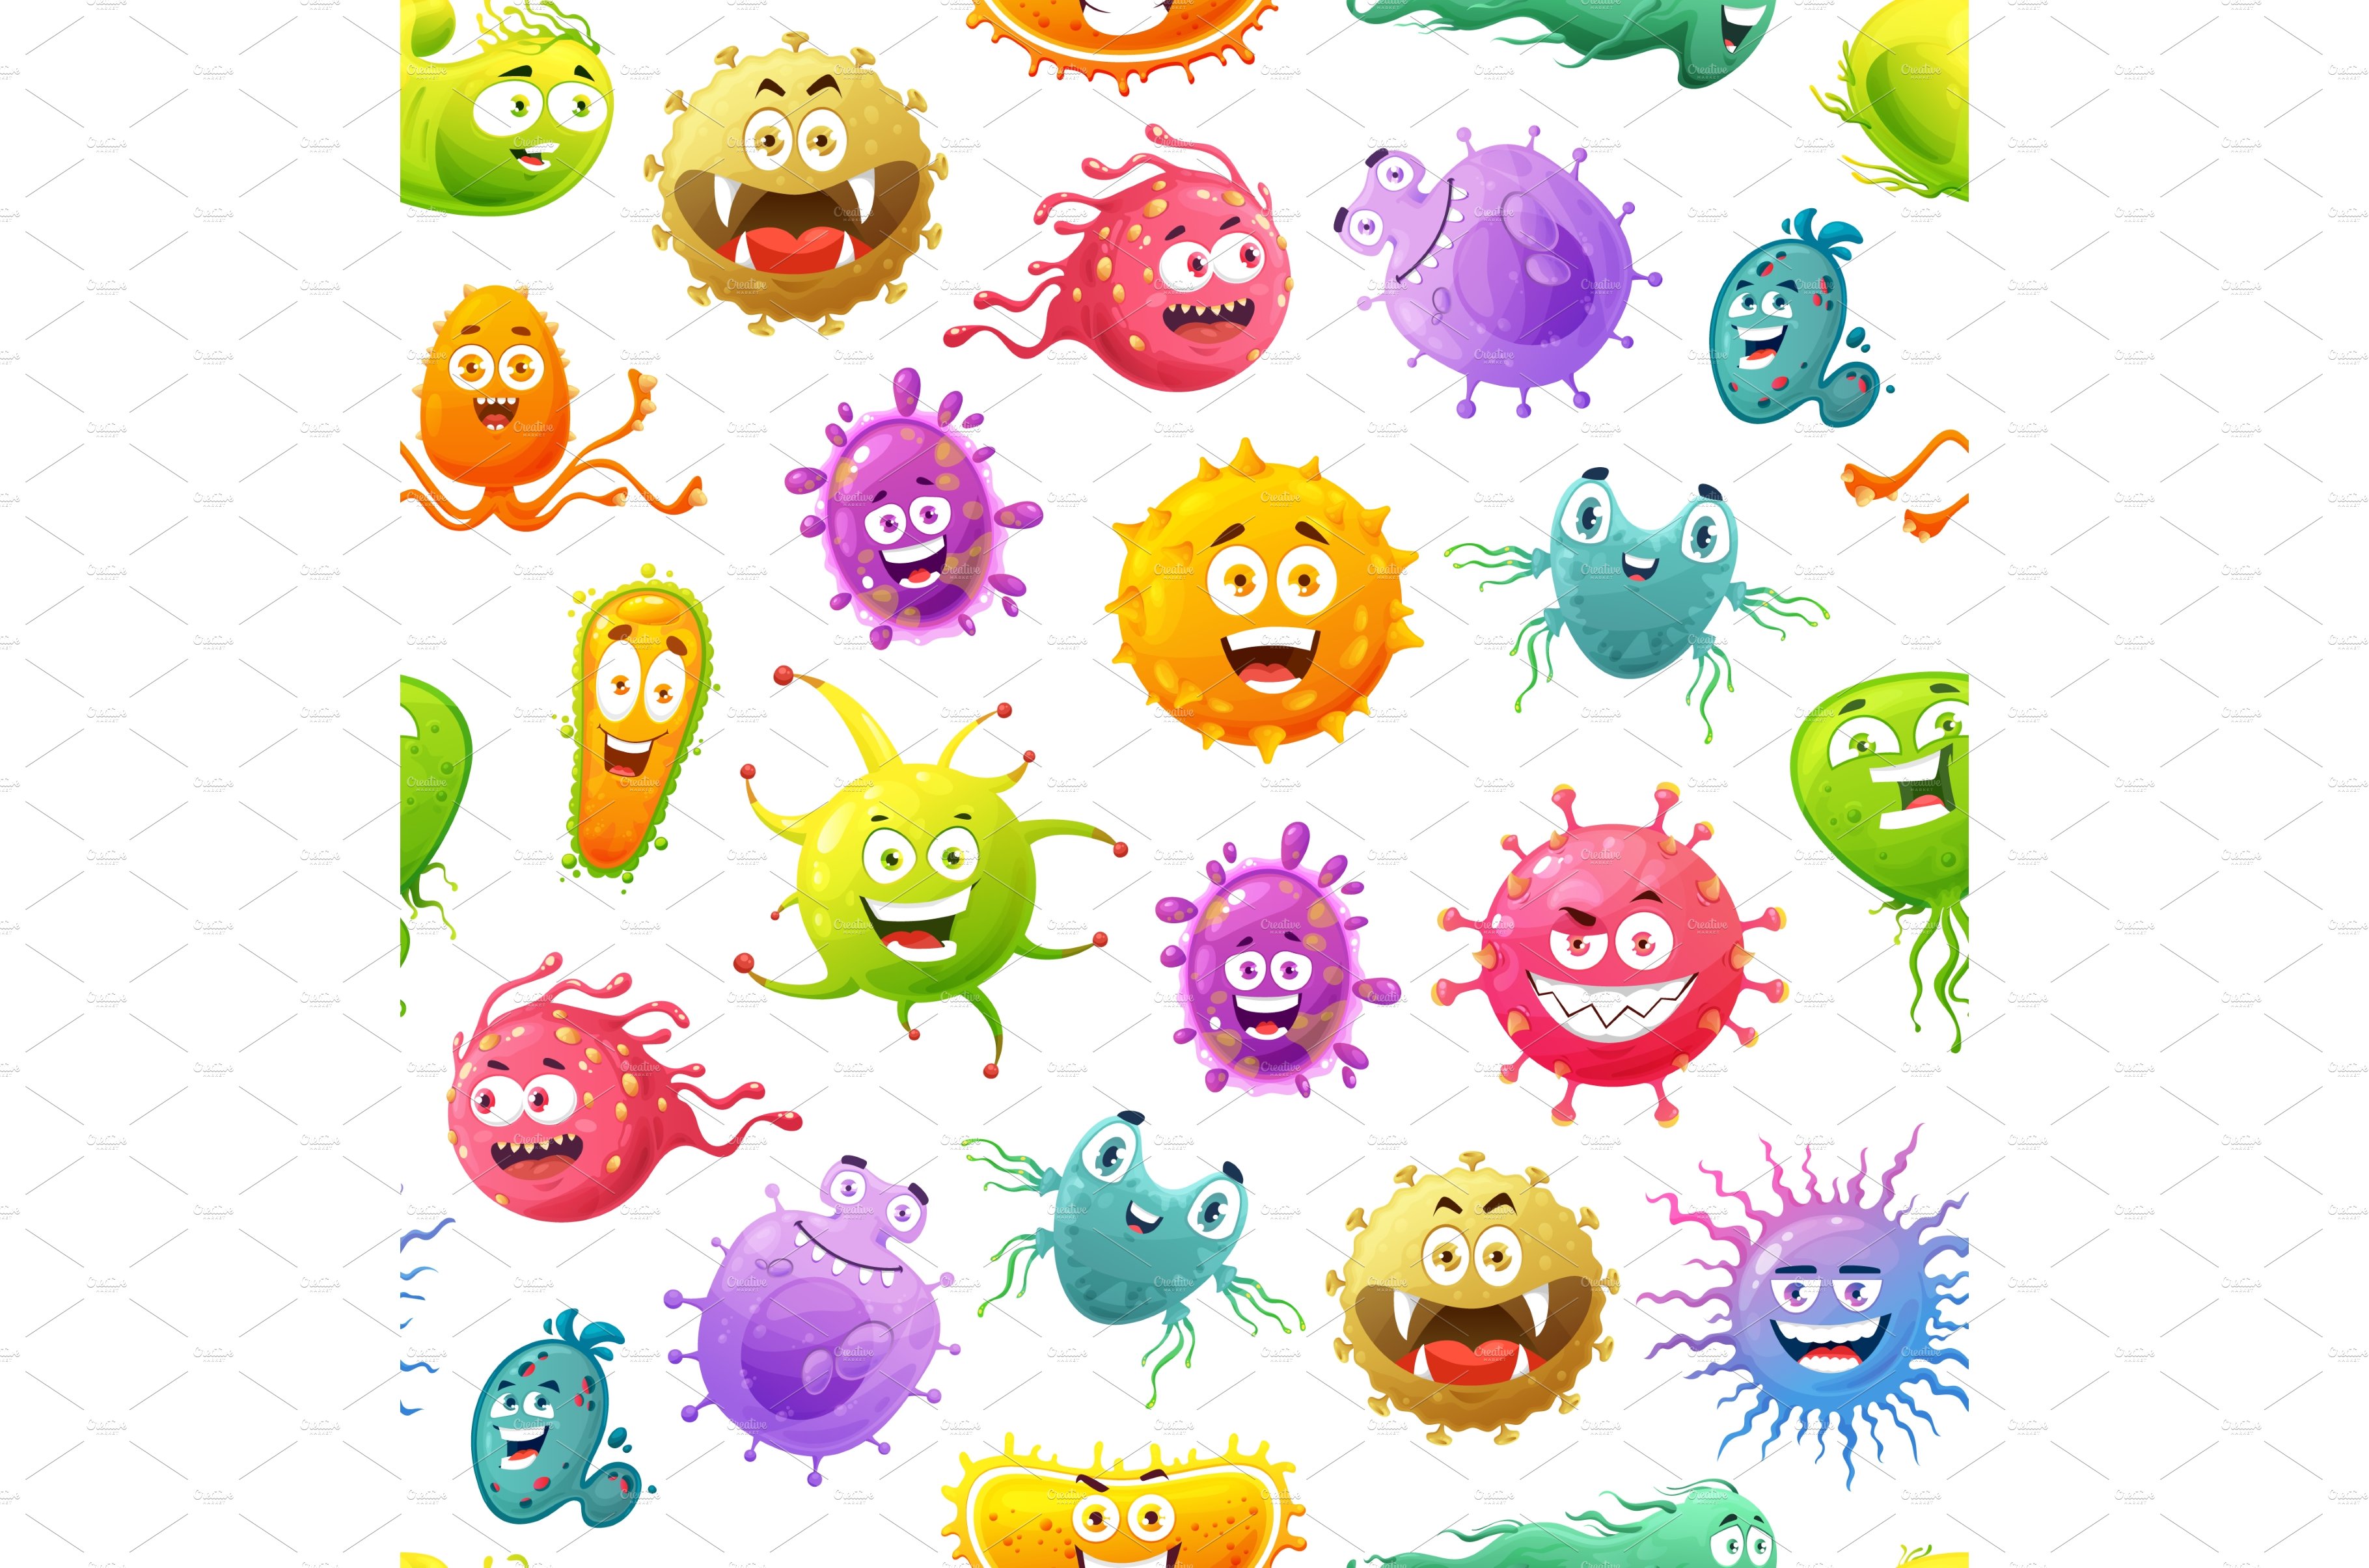 Viruses, microbes, germs pattern cover image.